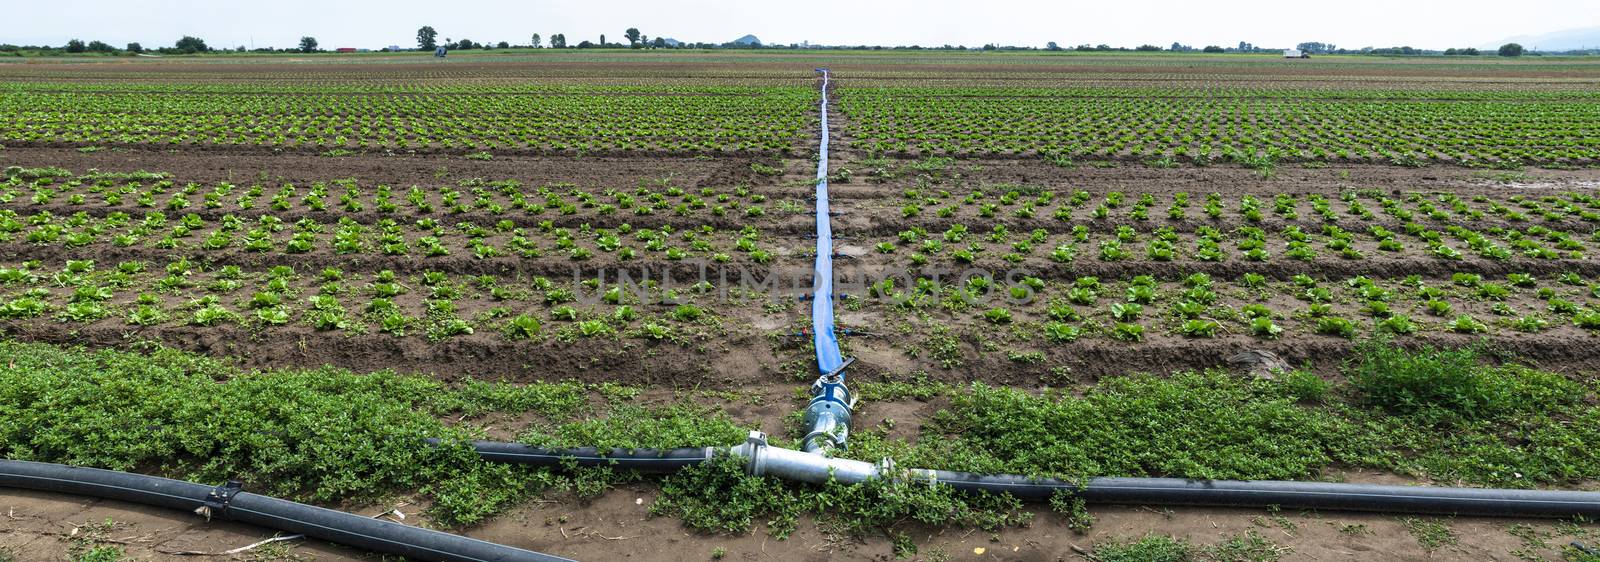 Planted agriculture land and pipe for watering. Iceberg lettuce plants. Panoramic image